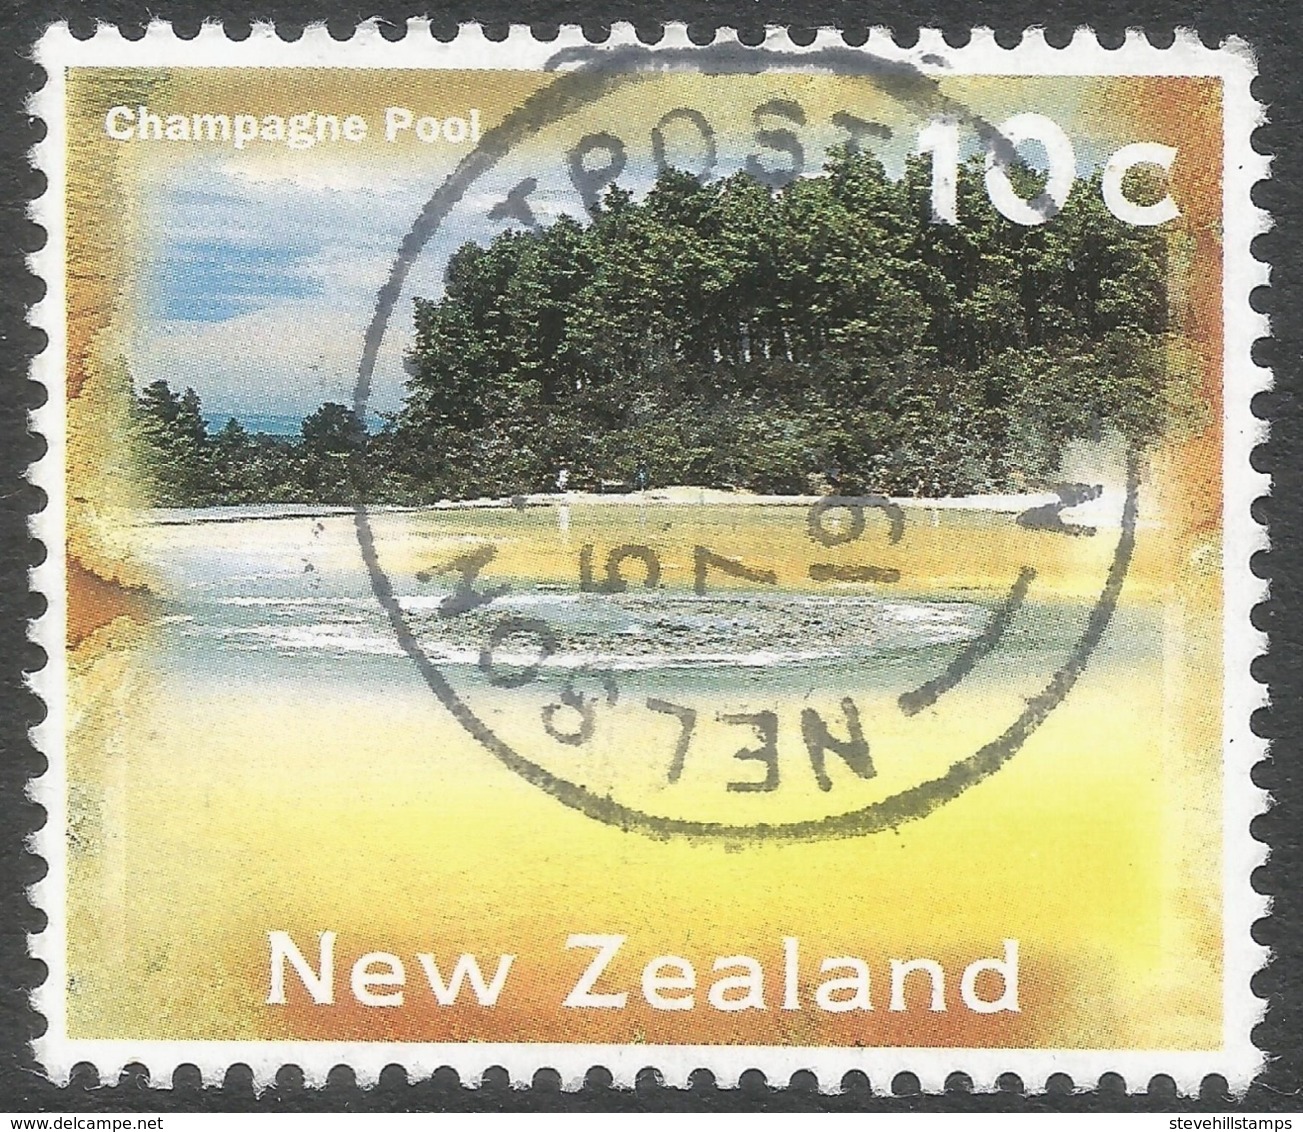 New Zealand. 1995 NZ Scenery. 10c Used. SG 1926 - Used Stamps